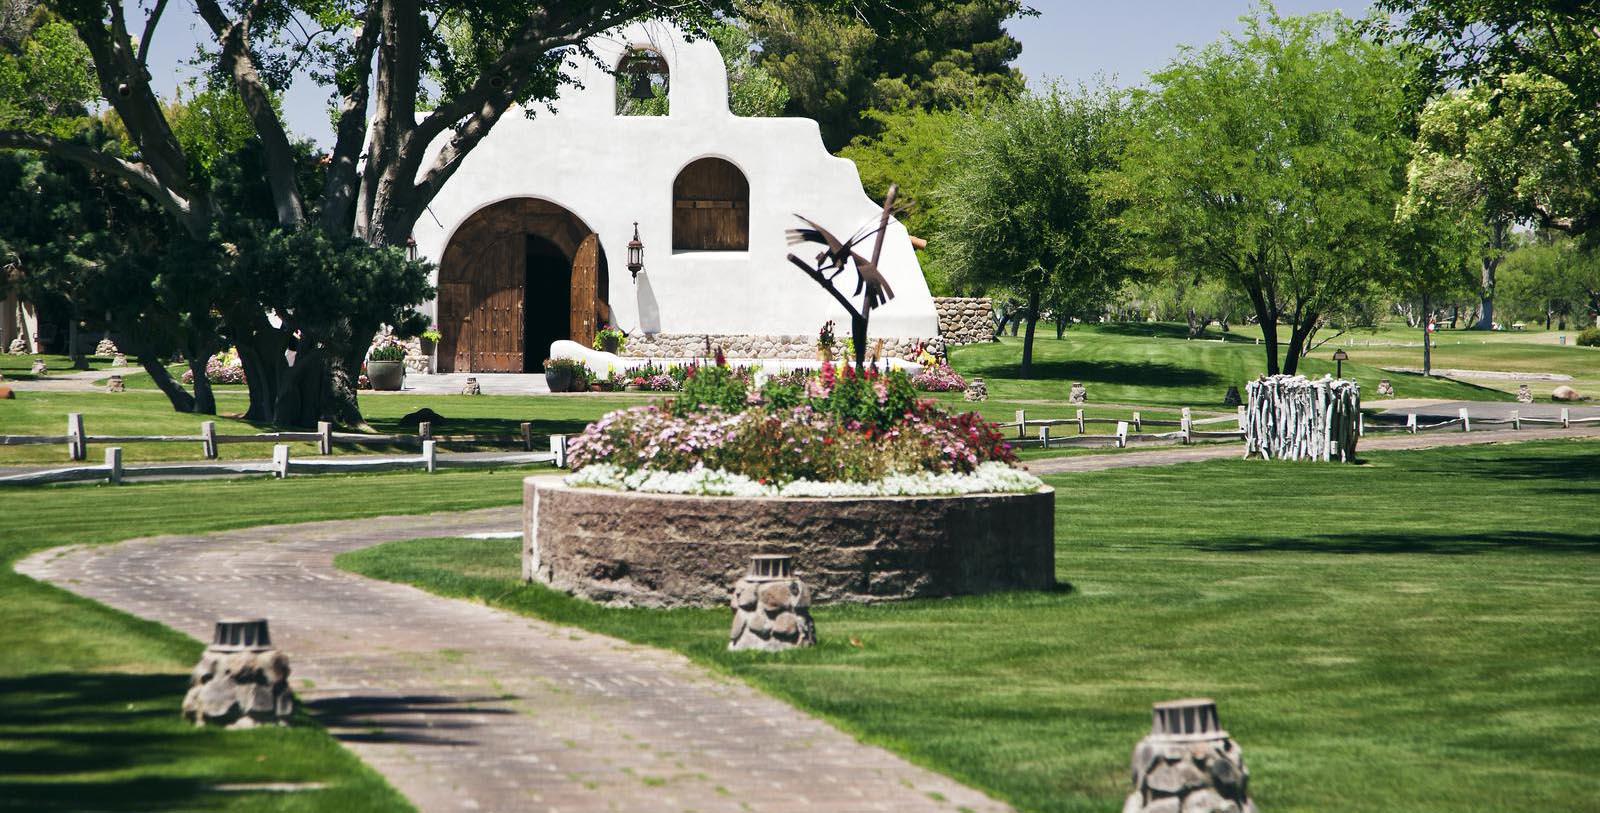 Discover the Spanish Colonial Revival-inspired architecture of the Tubac Golf Resort and Spa.